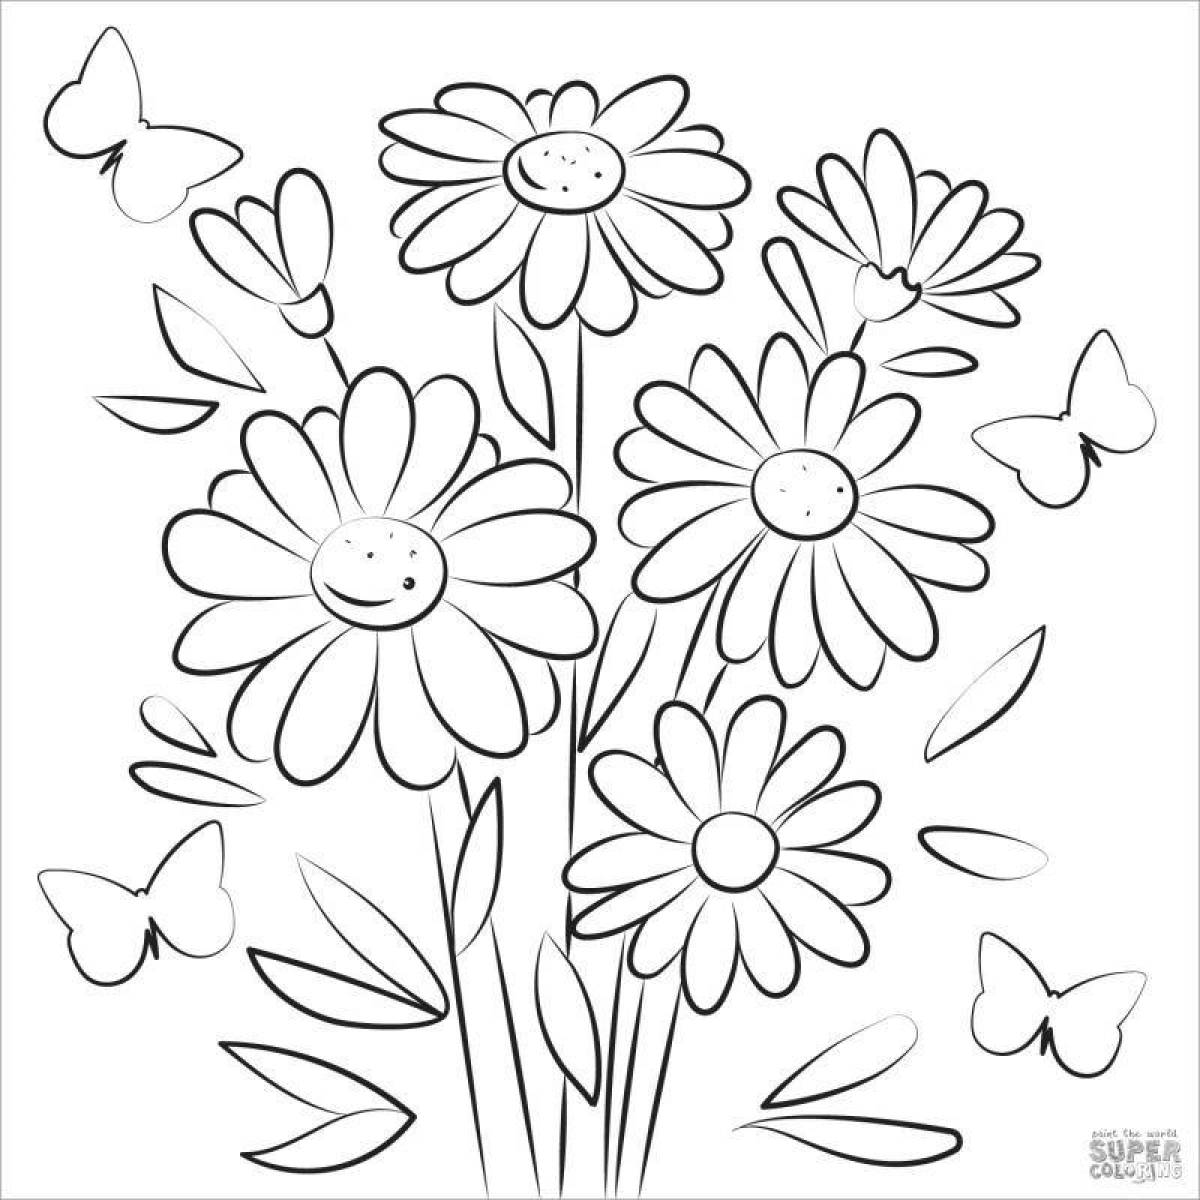 Coloring bright bouquet of daisies